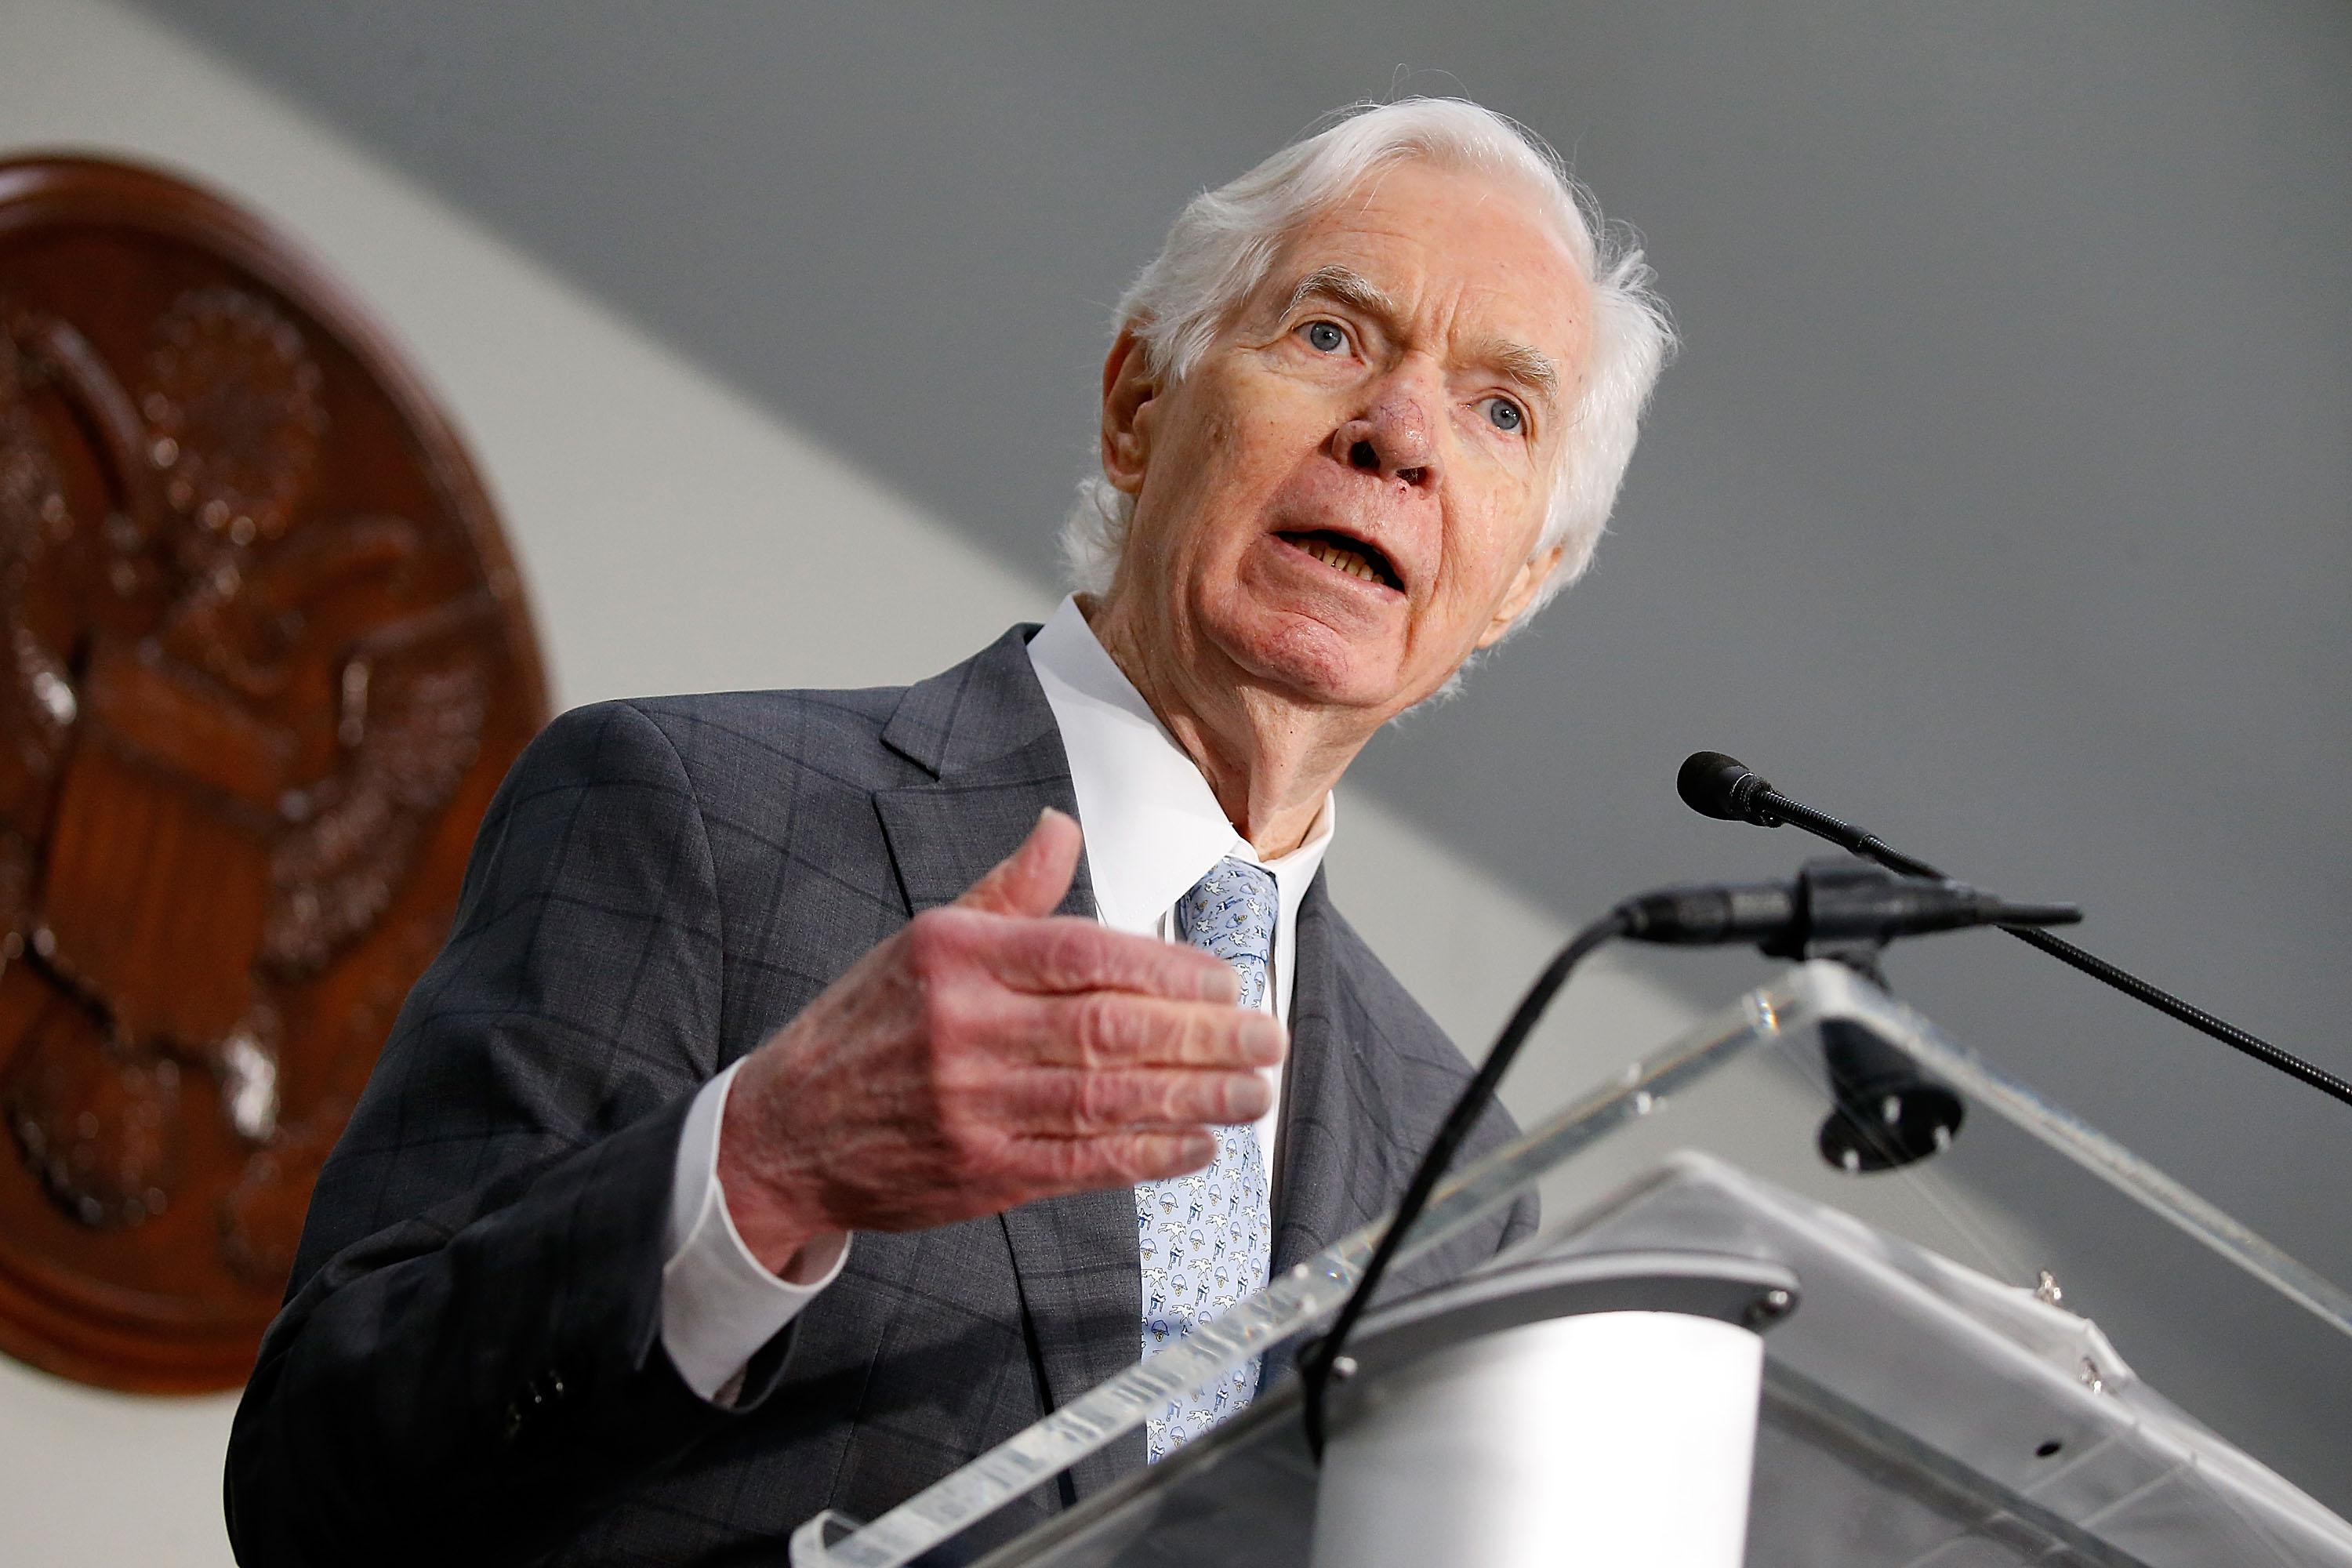 WASHINGTON, DC - JUNE 14:   U.S. Sen. Thad Cochran (R-MS) speaks at 'Making AIDS History: A Roadmap for Ending the Epidemic' at the Hart Senate Building on June 14, 2017 in Washington, DC.  (Photo by Paul Morigi/Getty Images)